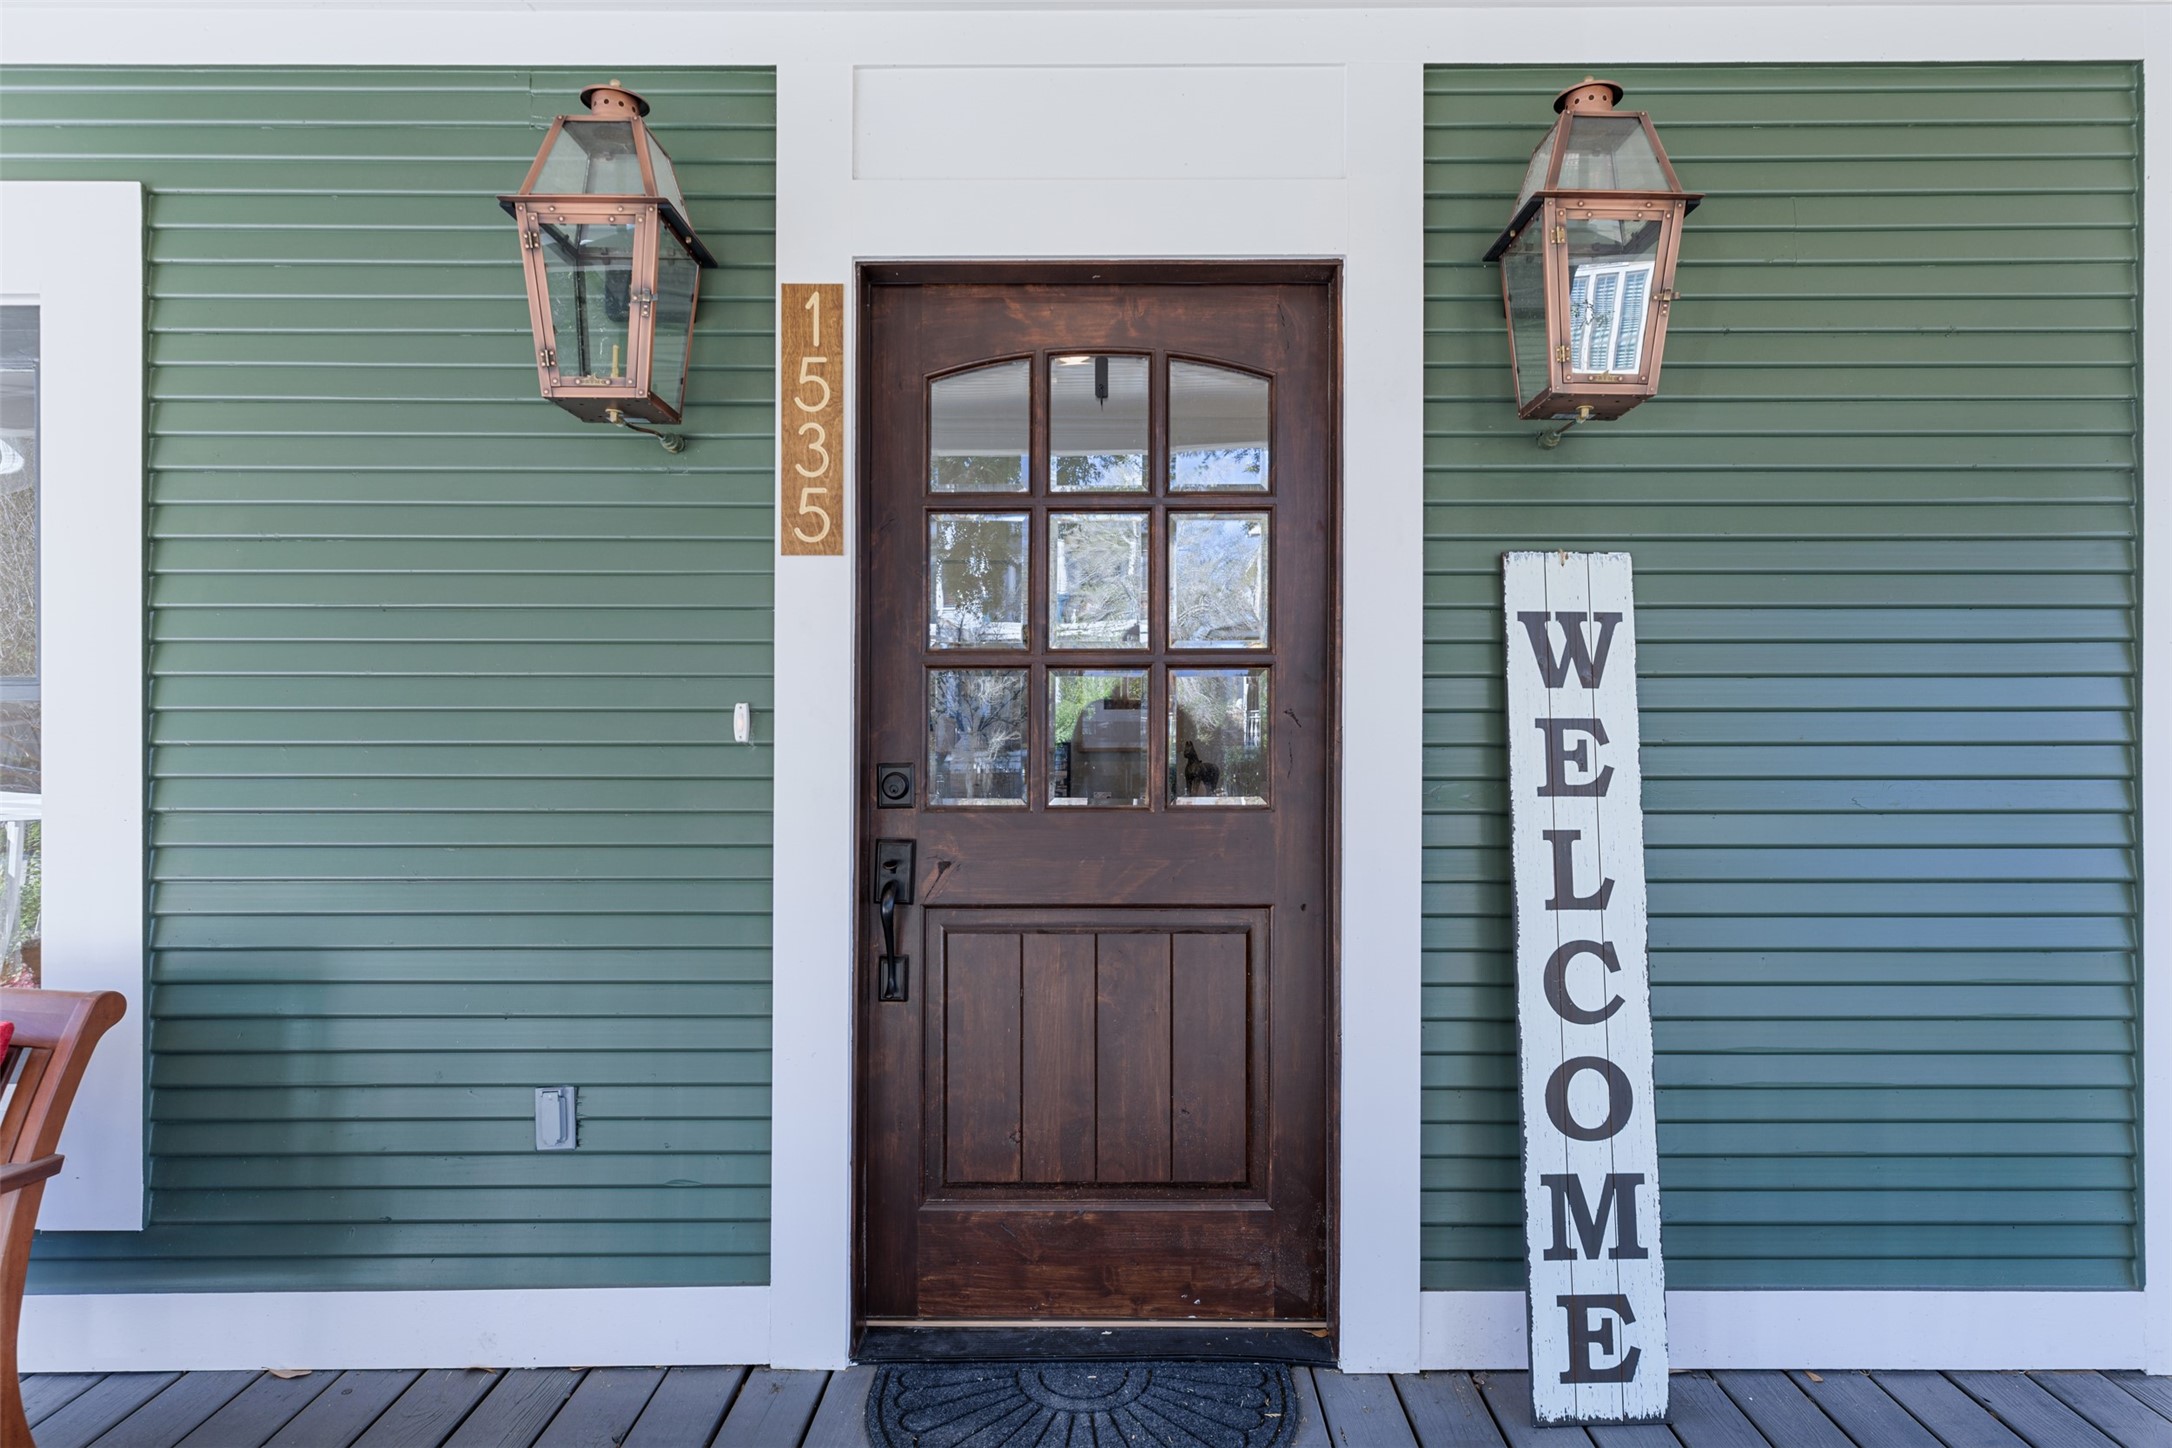 The beautiful front porch provides an inviting space to relax and unwind at the end of the day.  The copper gas lanterns add both charm and character perfectly showcasing the beautiful rendition of this impressive Victorian historic renovated property.